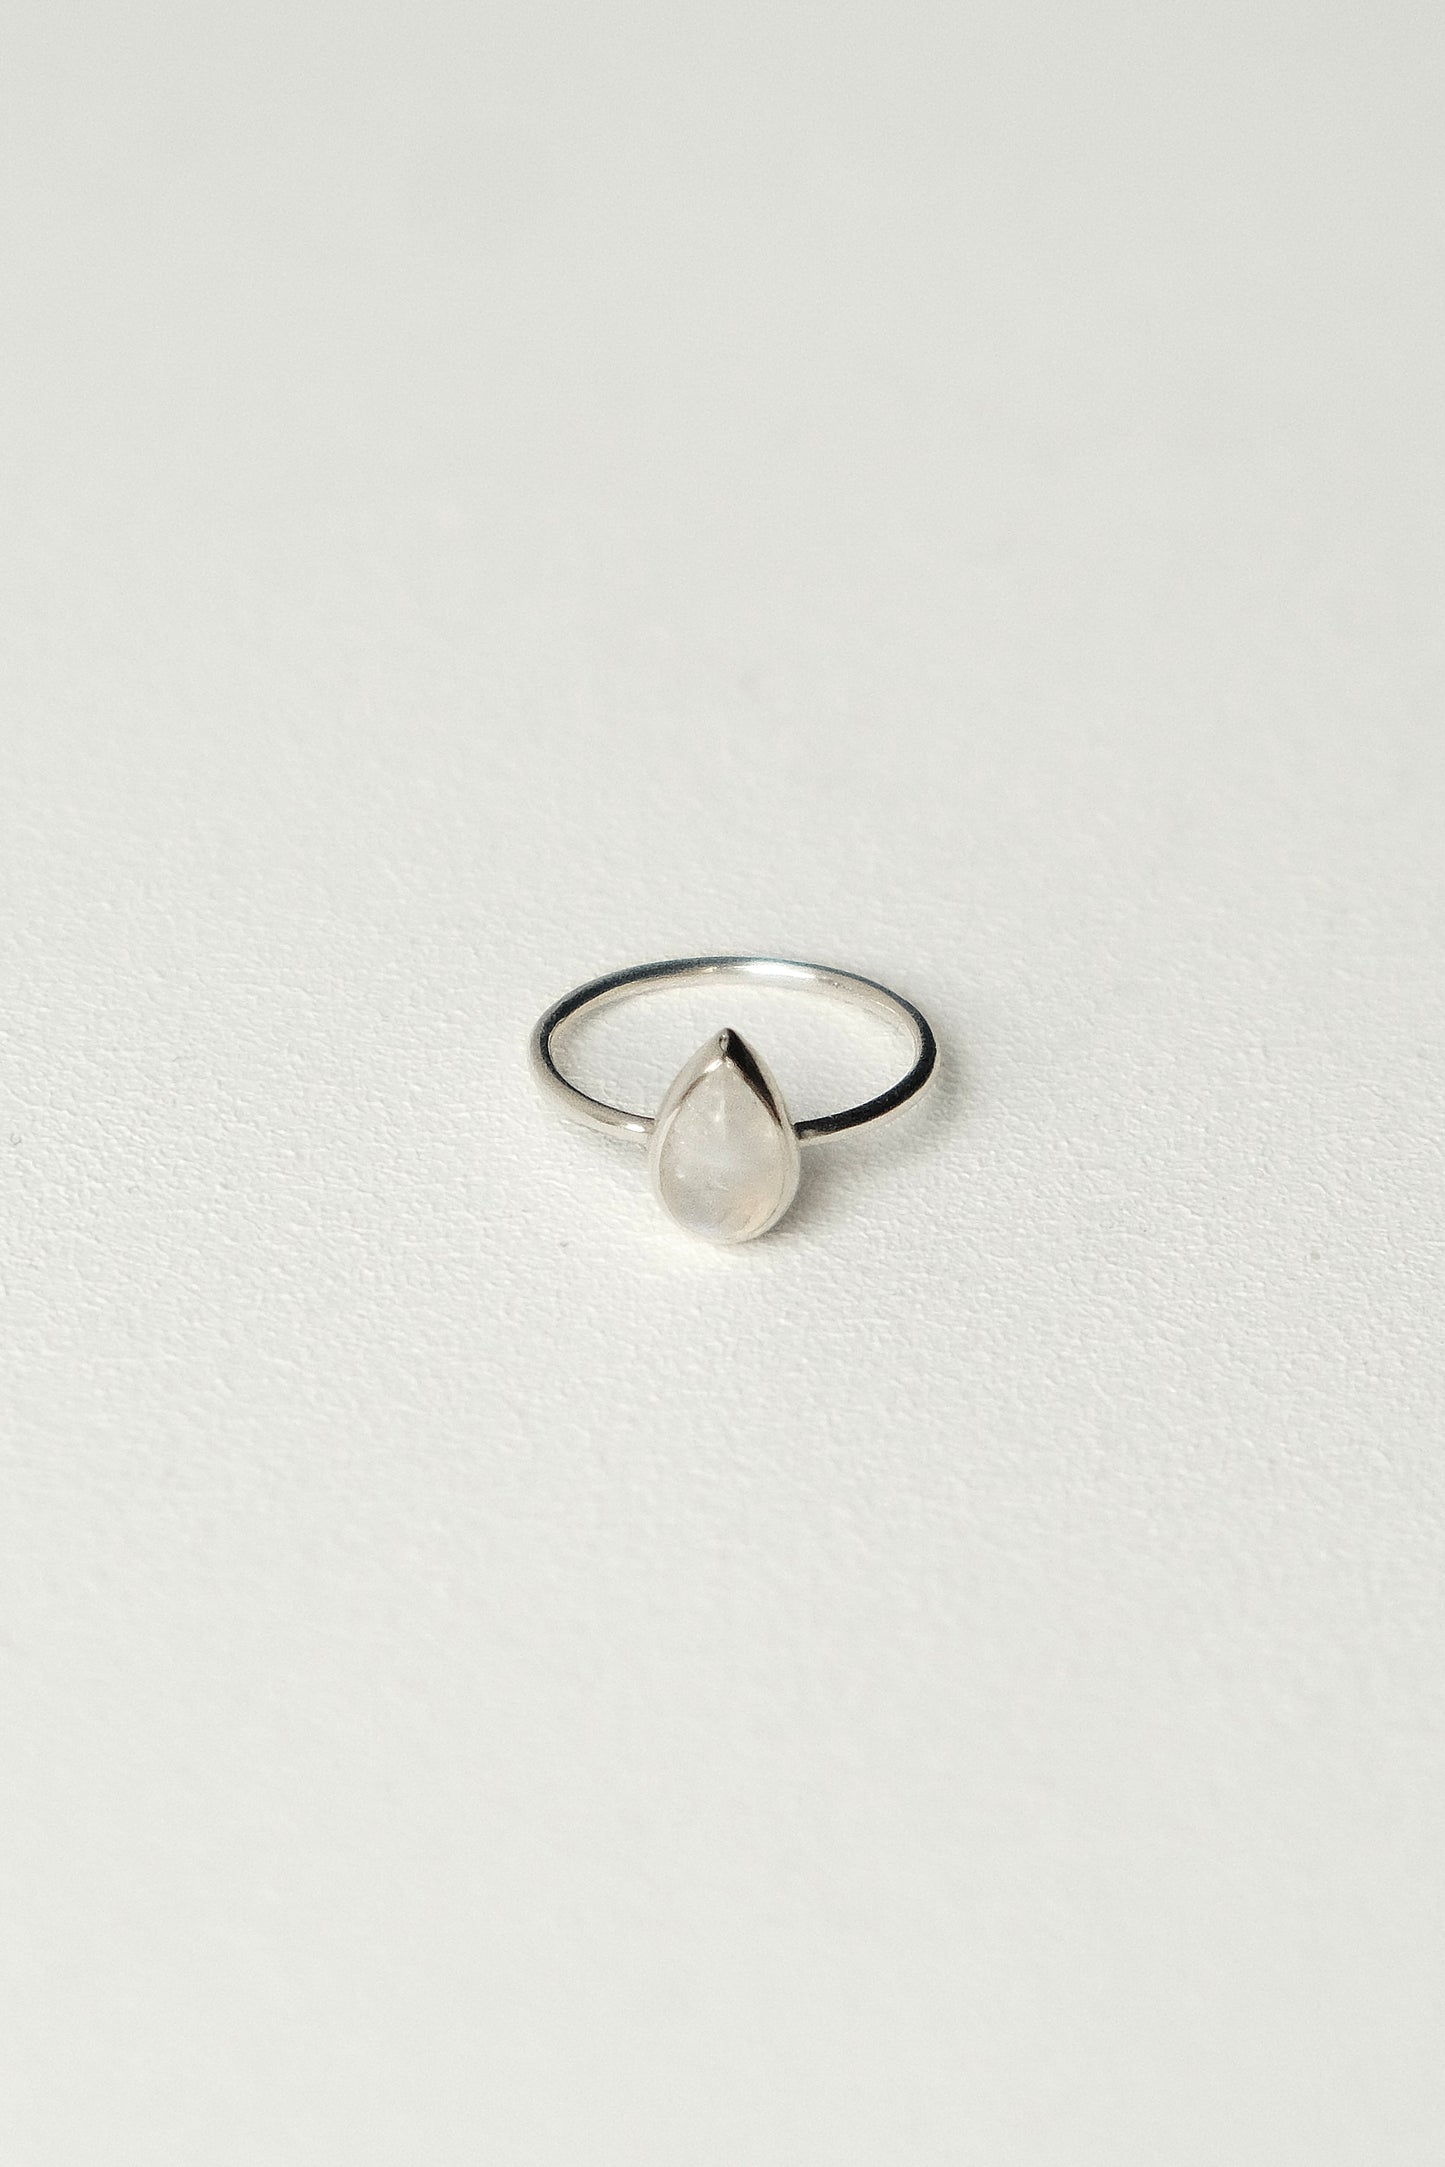 "MOON" ring in the shape of a drop